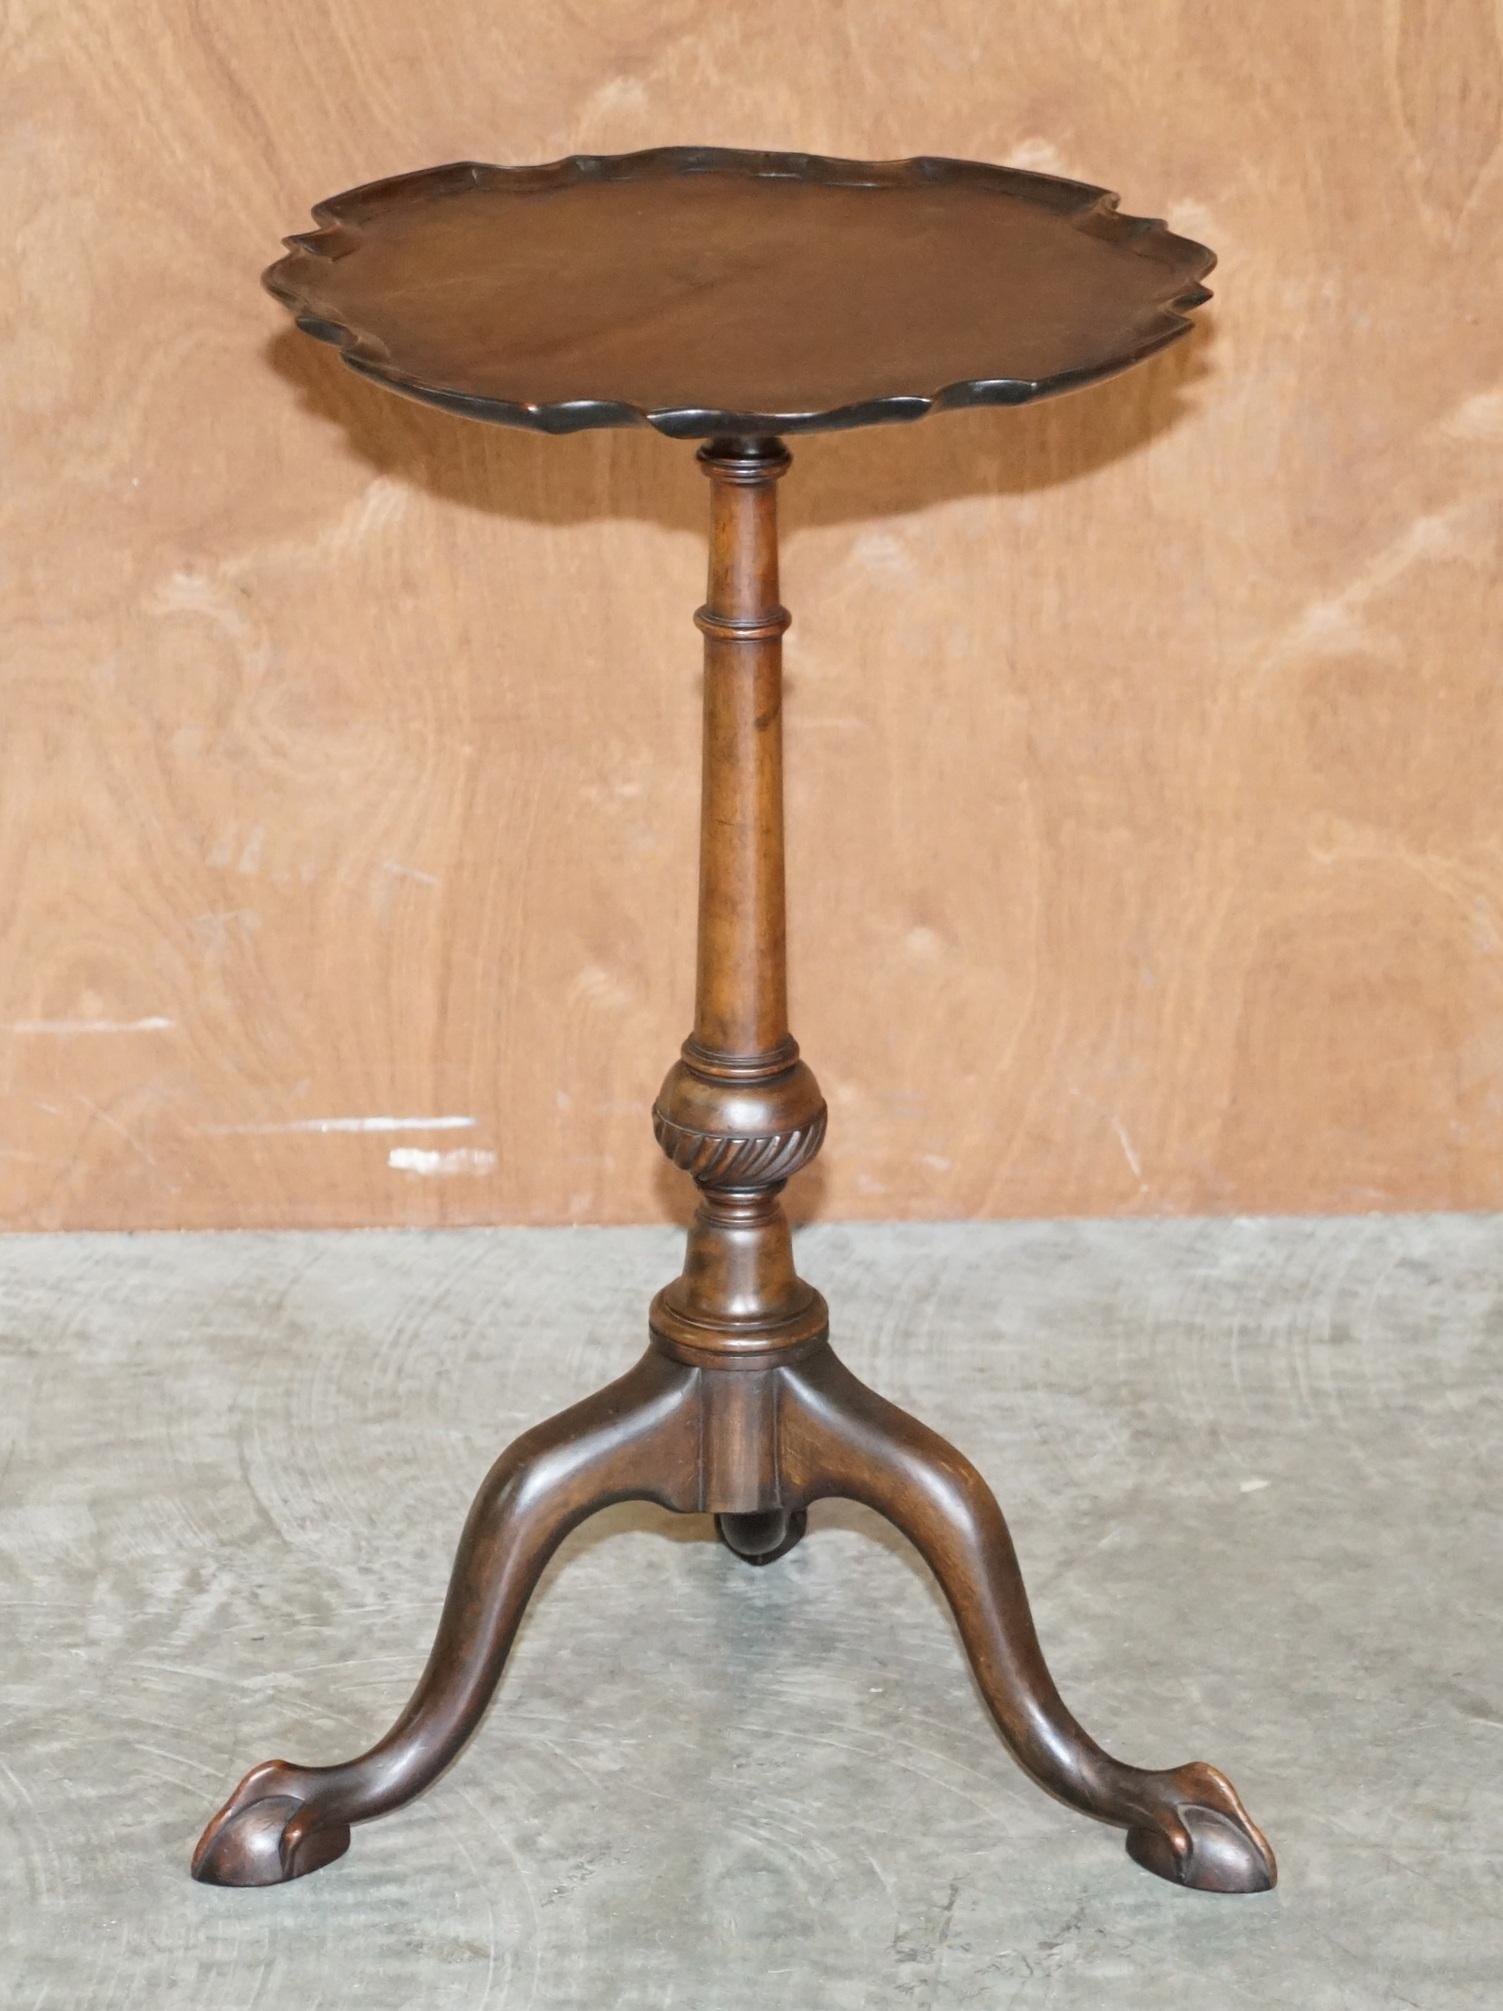 we are delighted to offer this very fine antique mahogany pie crust edge tripod table after the original by Gillow's of Lancaster 

A very good looking well made and decorative piece, it sits beautifully in any setting and is very unitarian. This